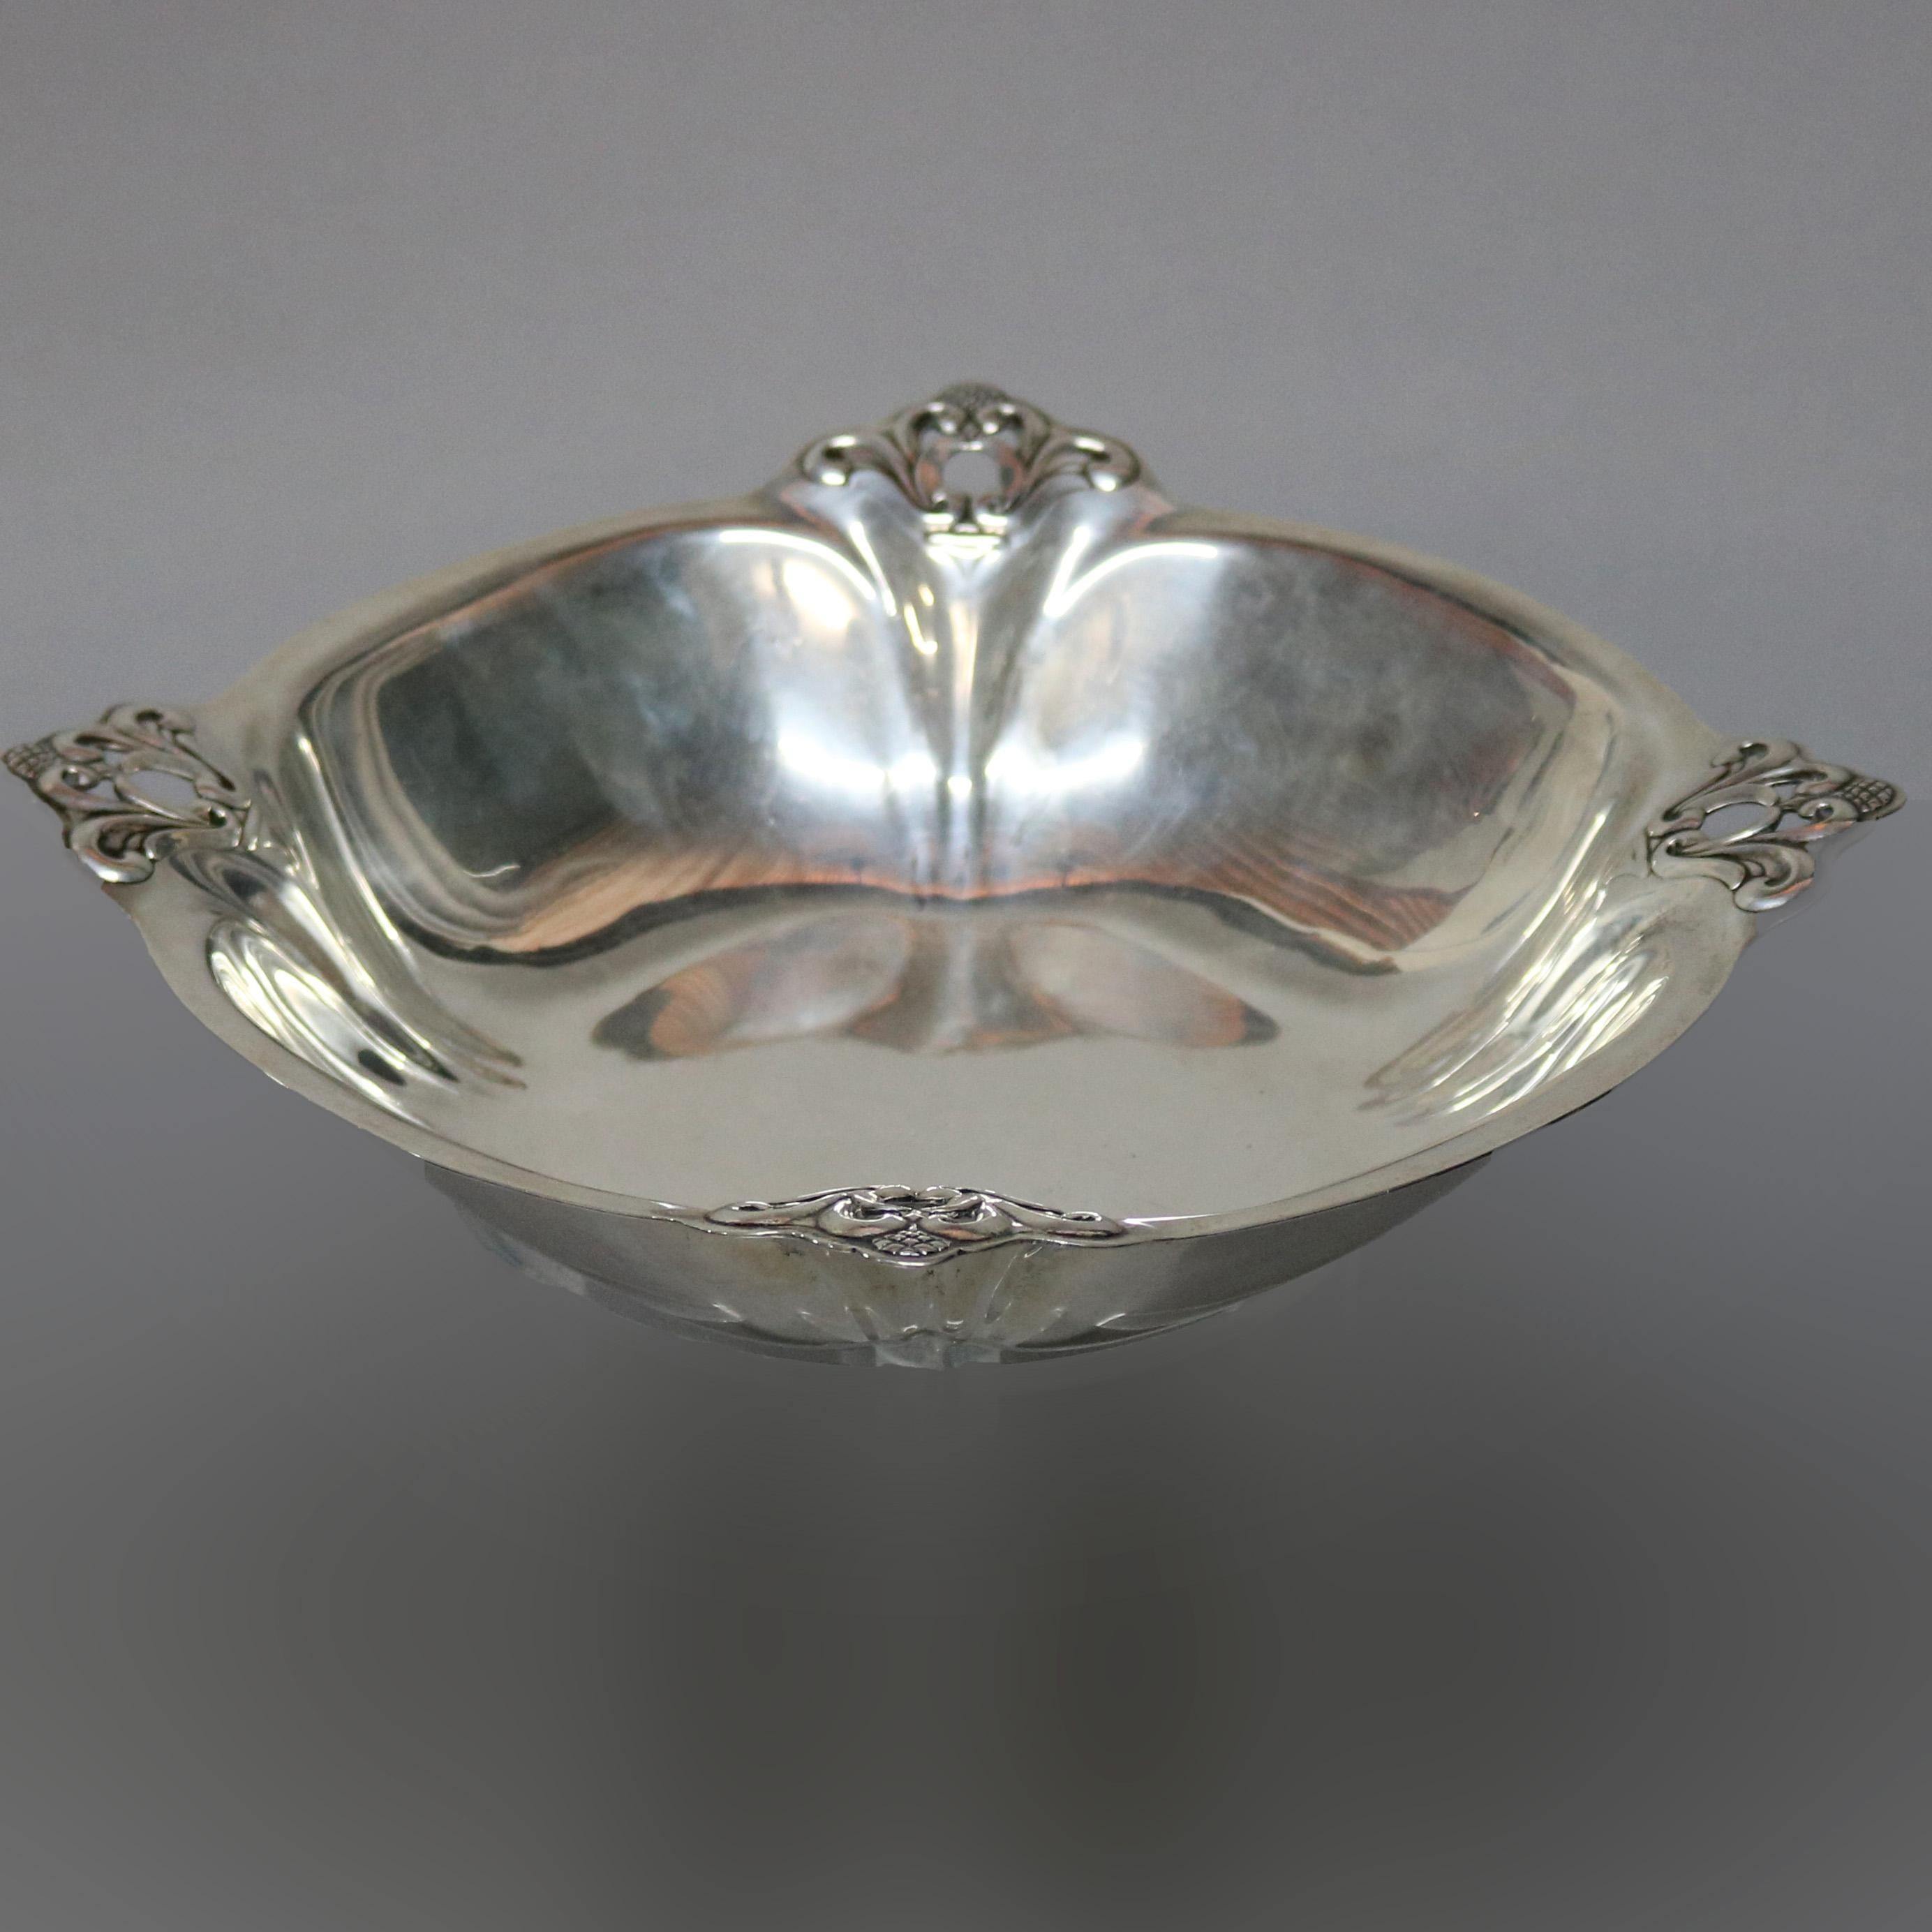 An Art Nouveau sterling silver center bowl by Royal Danish offers square form with pierced foliate corners, elements of Mid-Century Modern, marked on base as photographed, 22.2 toz, circa 1930.

Measures - 2.5